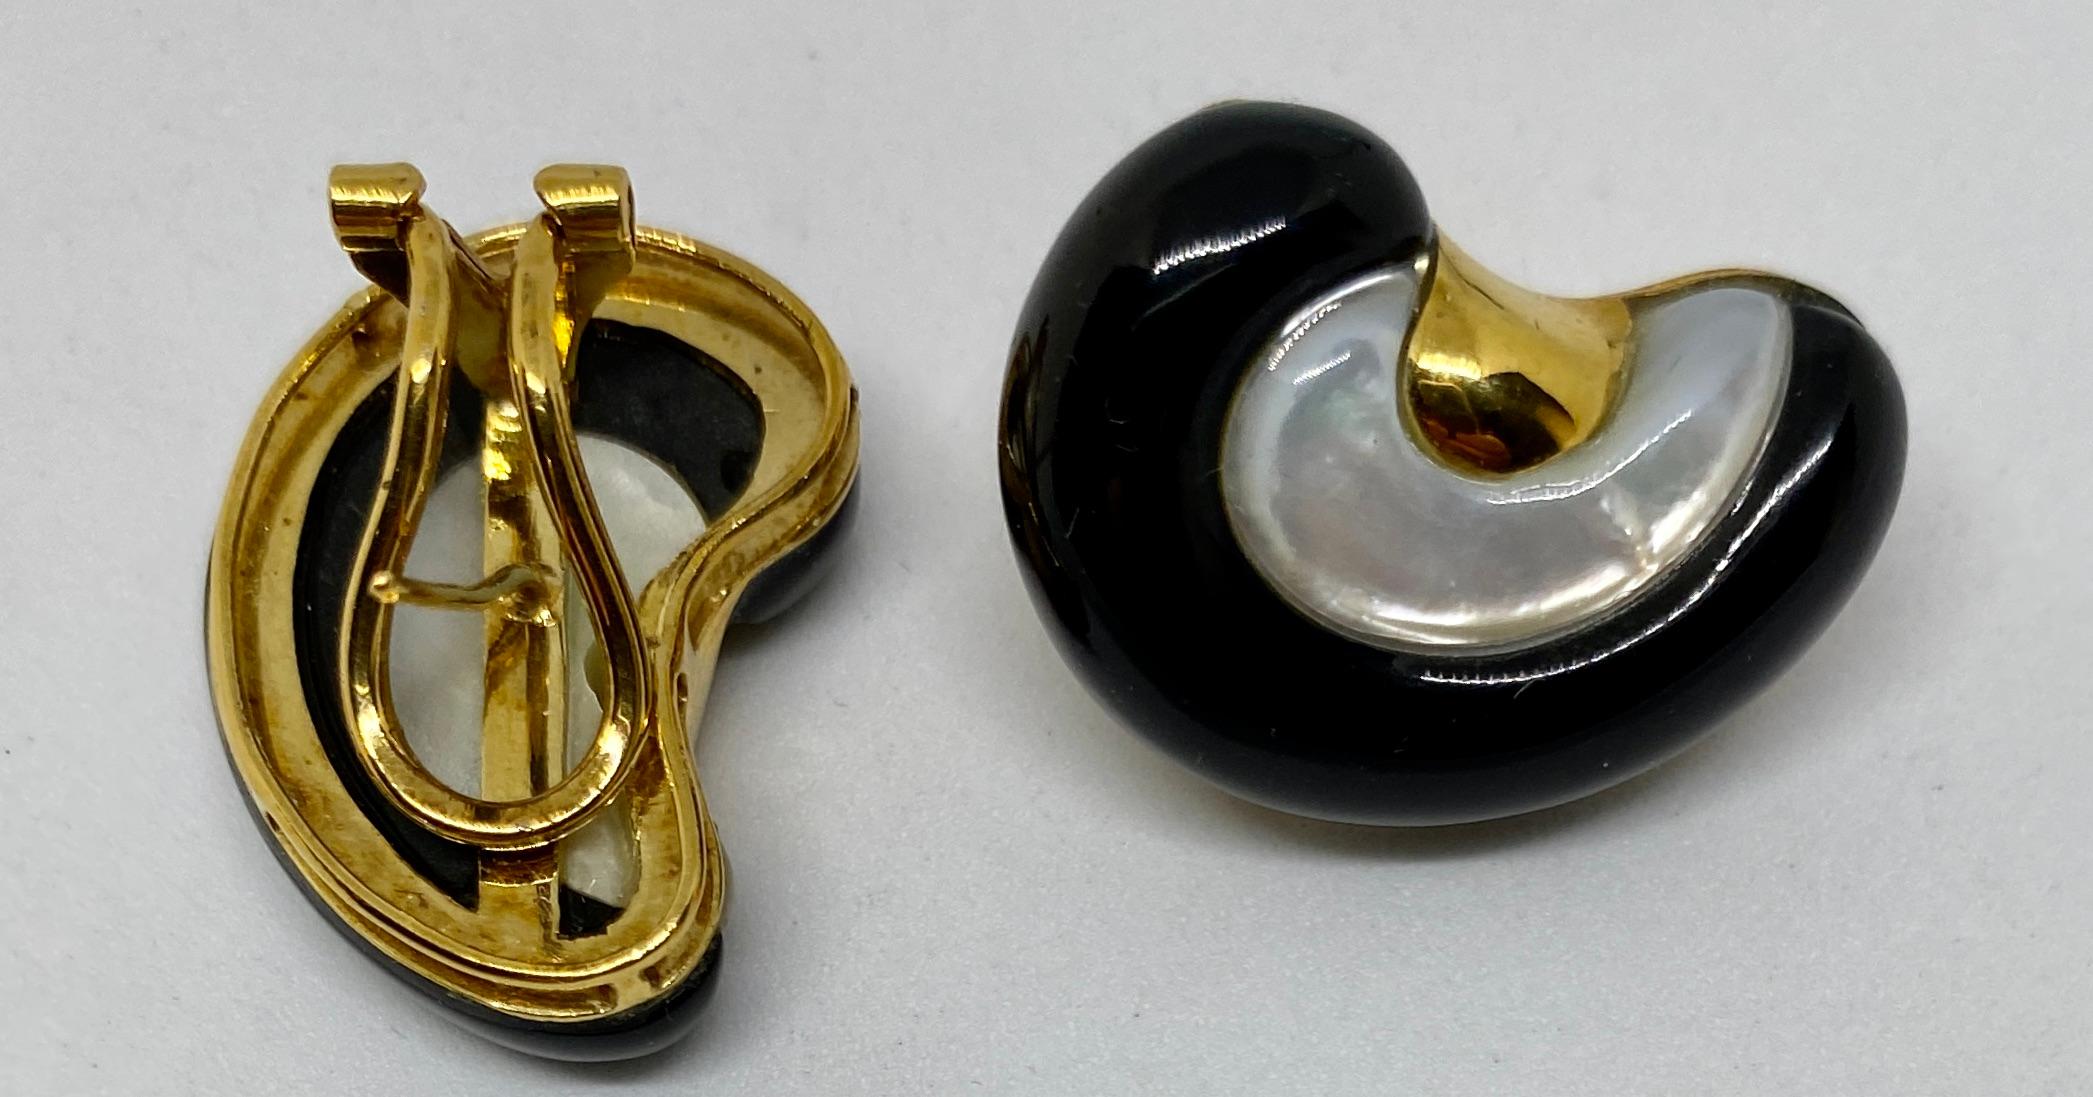 Shell-Shaped Yellow Gold Earrings in Black Onyx with White Mother-of-Pearl In Good Condition For Sale In San Rafael, CA